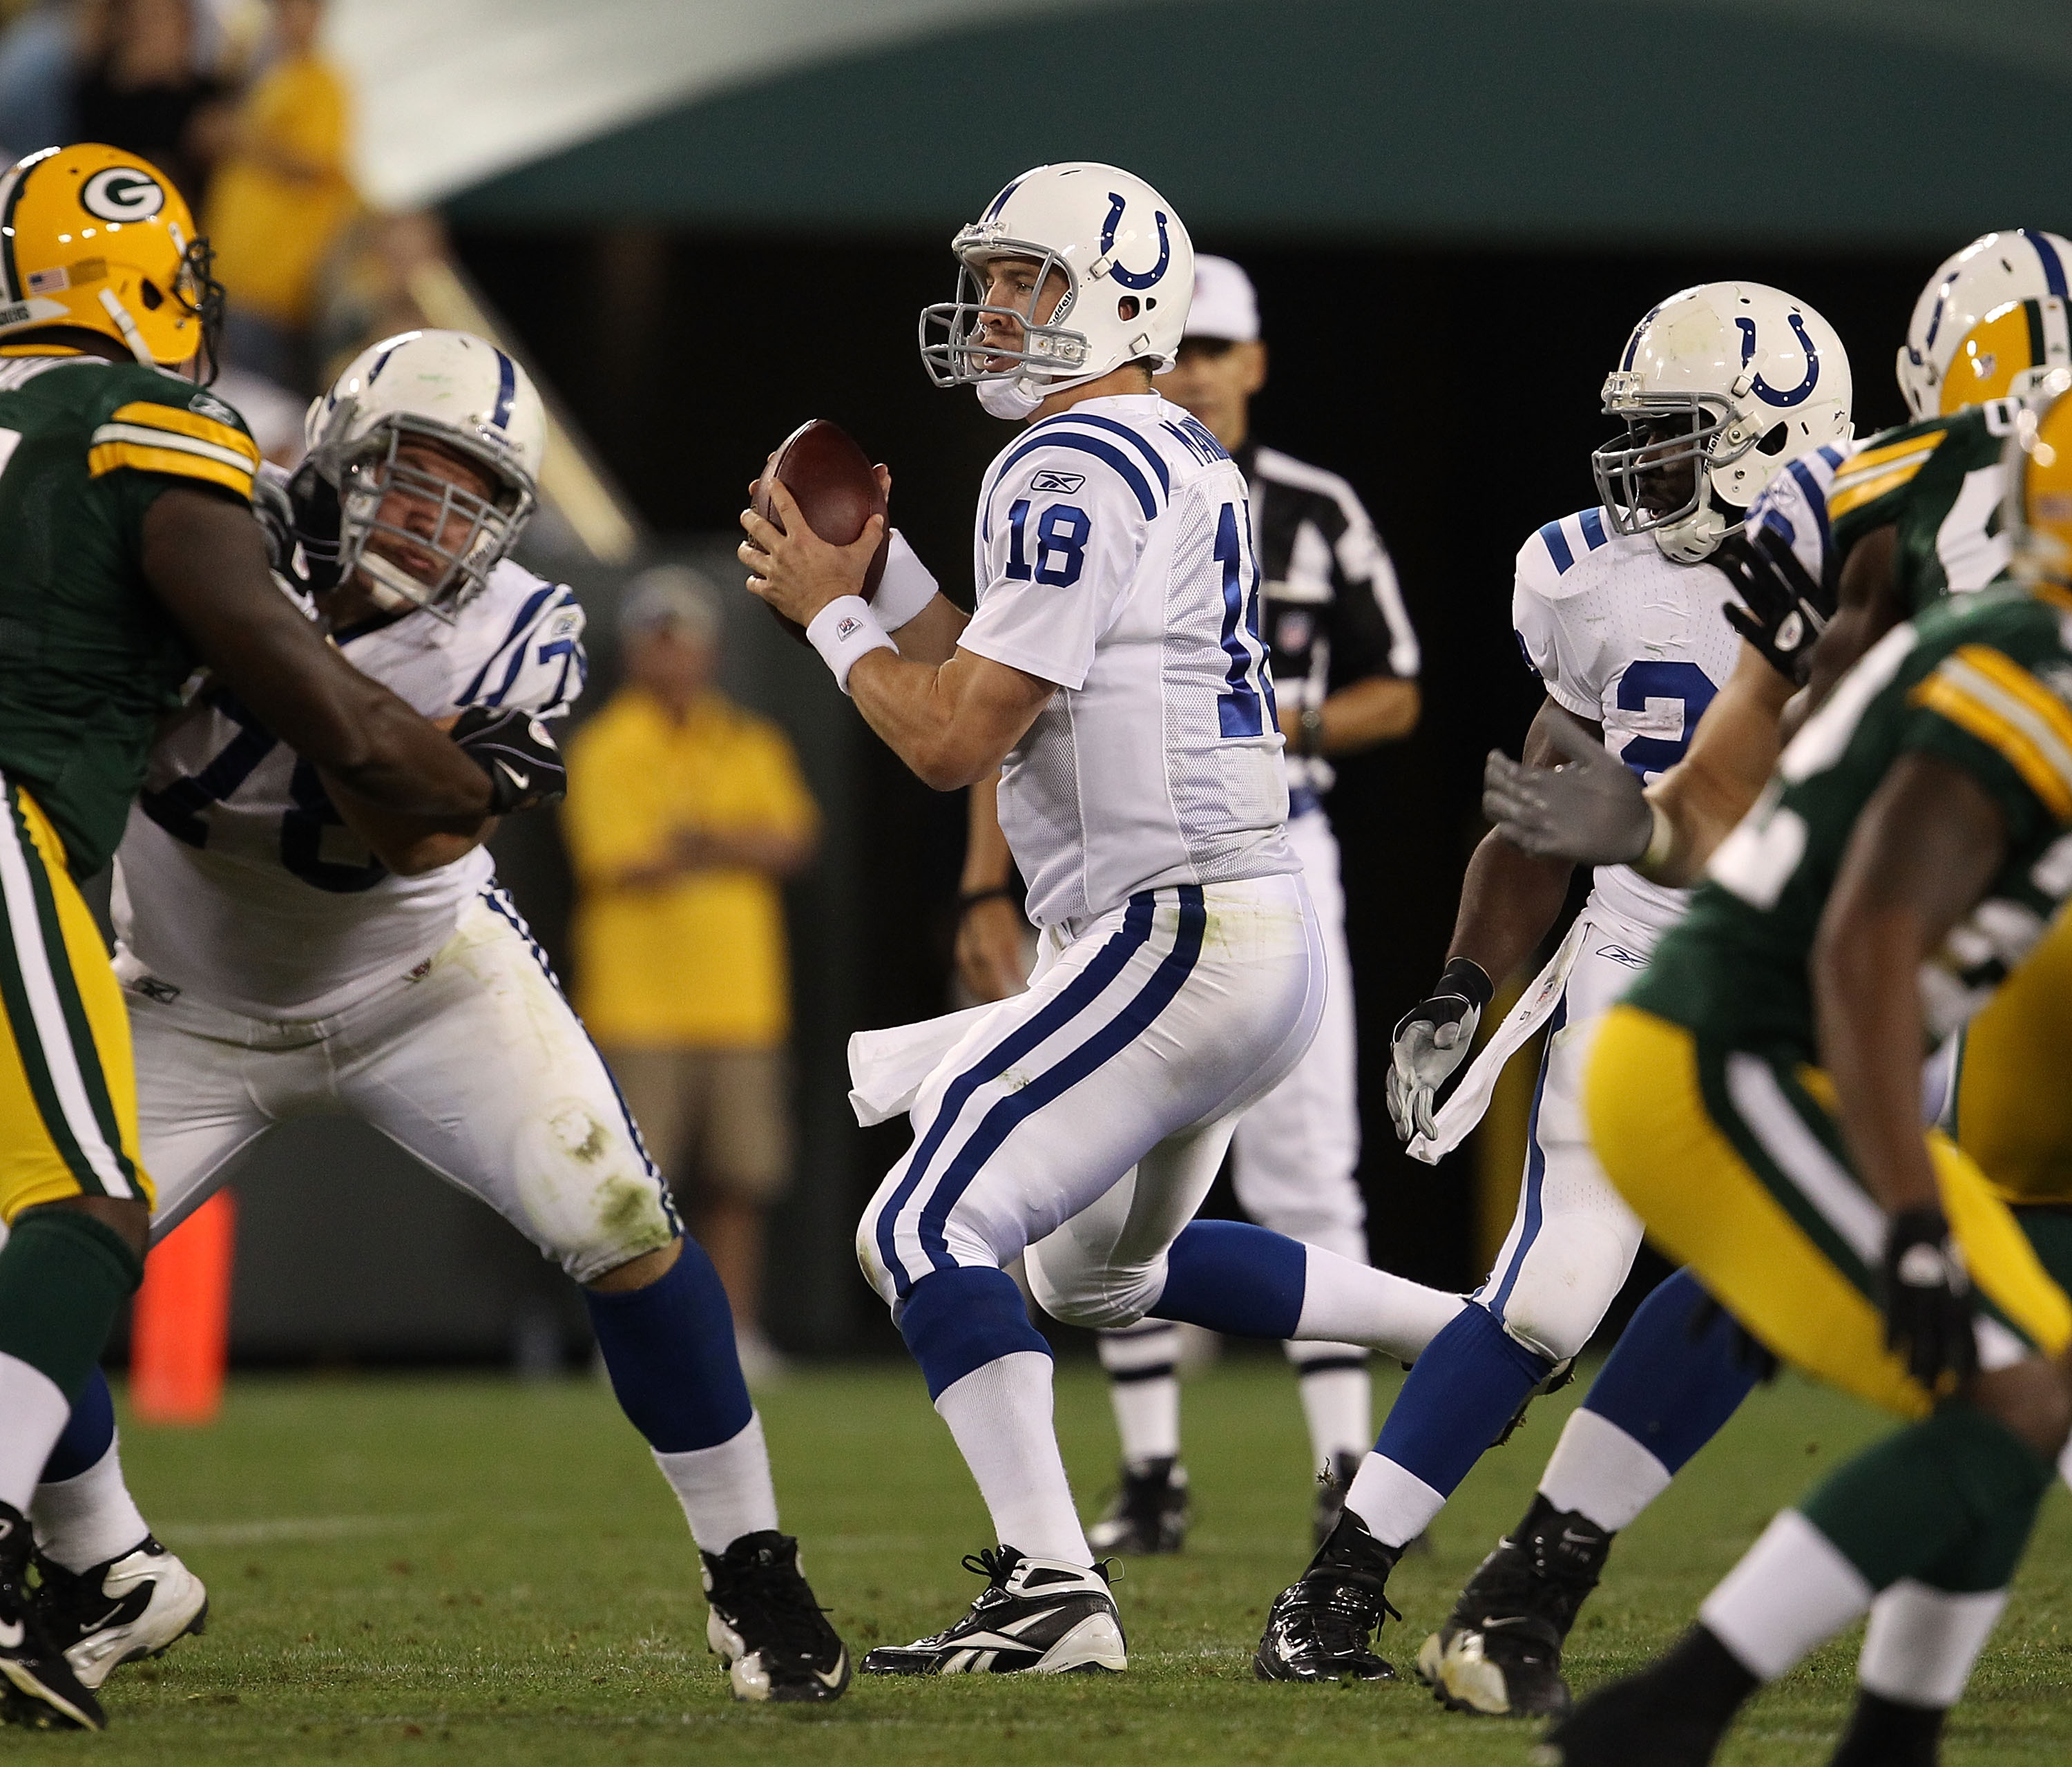 GREEN BAY, WI - AUGUST 26: Peyton Manning #18 of the Indianapolis Colts drops back to pass against the Green Bay Packers during a preseason game at Lambeau Field on August 26, 2010 in Green Bay, Wisconsin.  The Packers defeated the Colts 59-24.  (Photo by